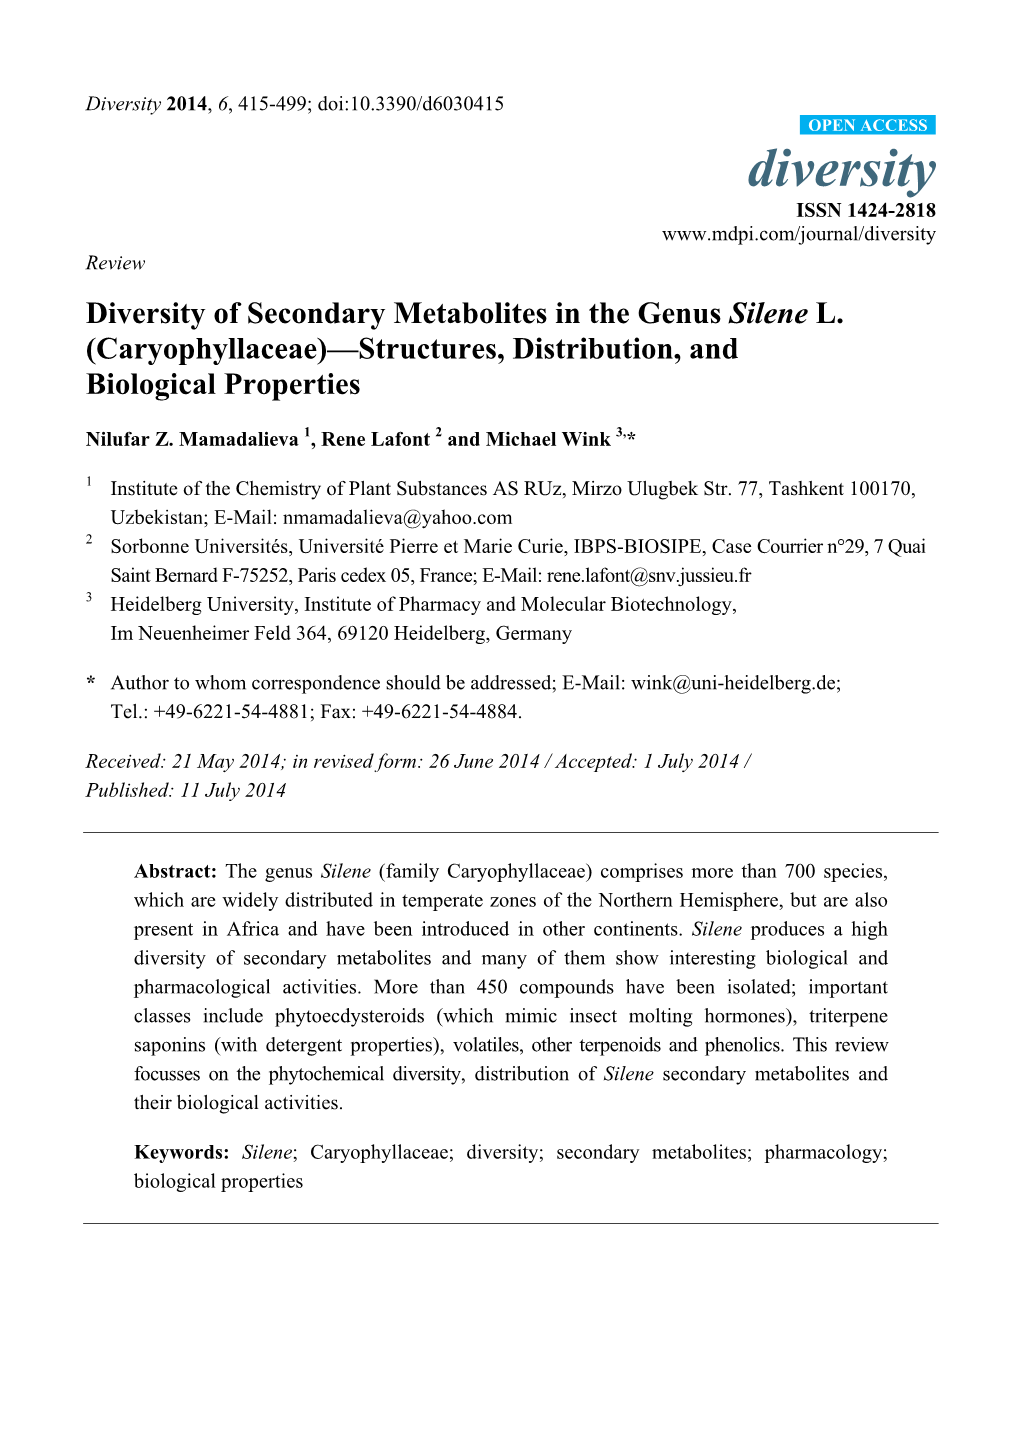 Diversity of Secondary Metabolites in the Genus Silene L. (Caryophyllaceae)—Structures, Distribution, and Biological Properties